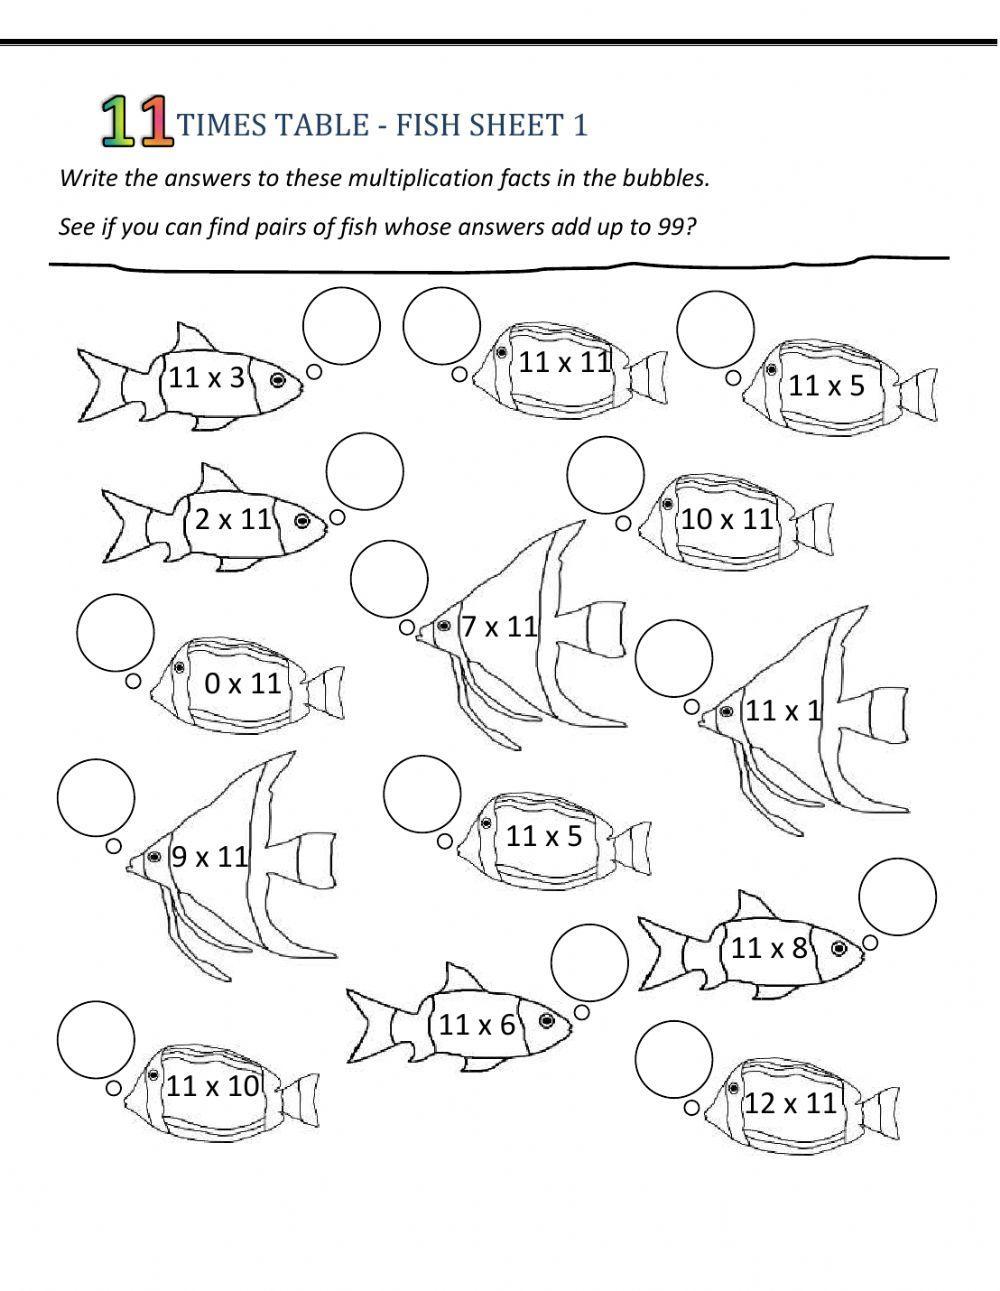 11 Times Table-Fish